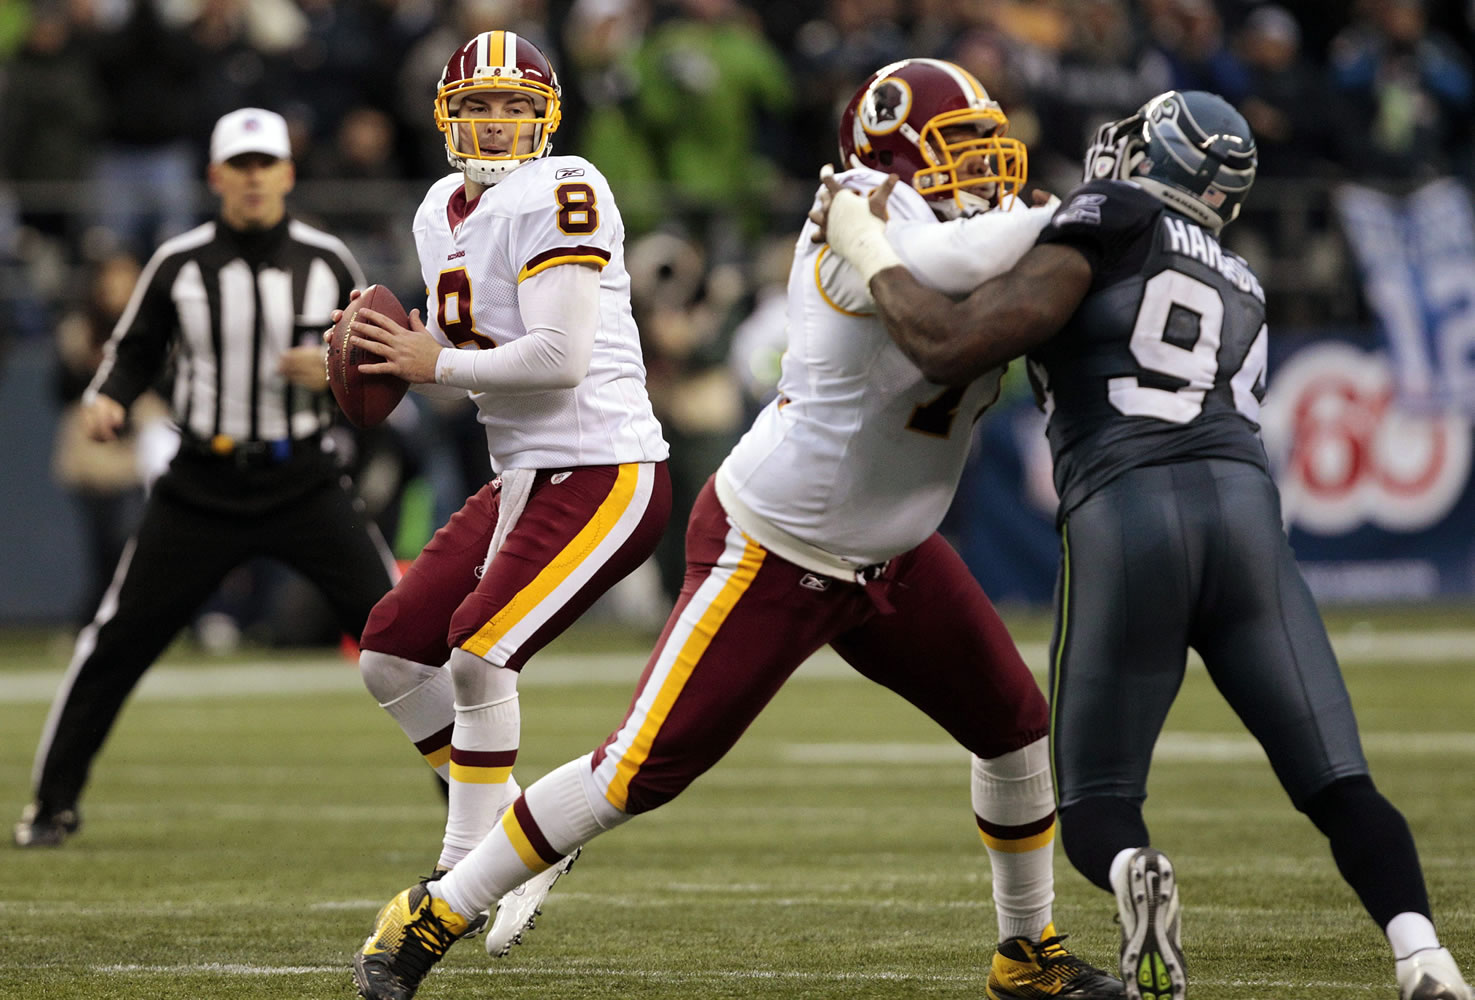 Washington Redskins quarterback Rex Grossman threw for 314 yards in the 23-17 win at Seattle on Sunday.